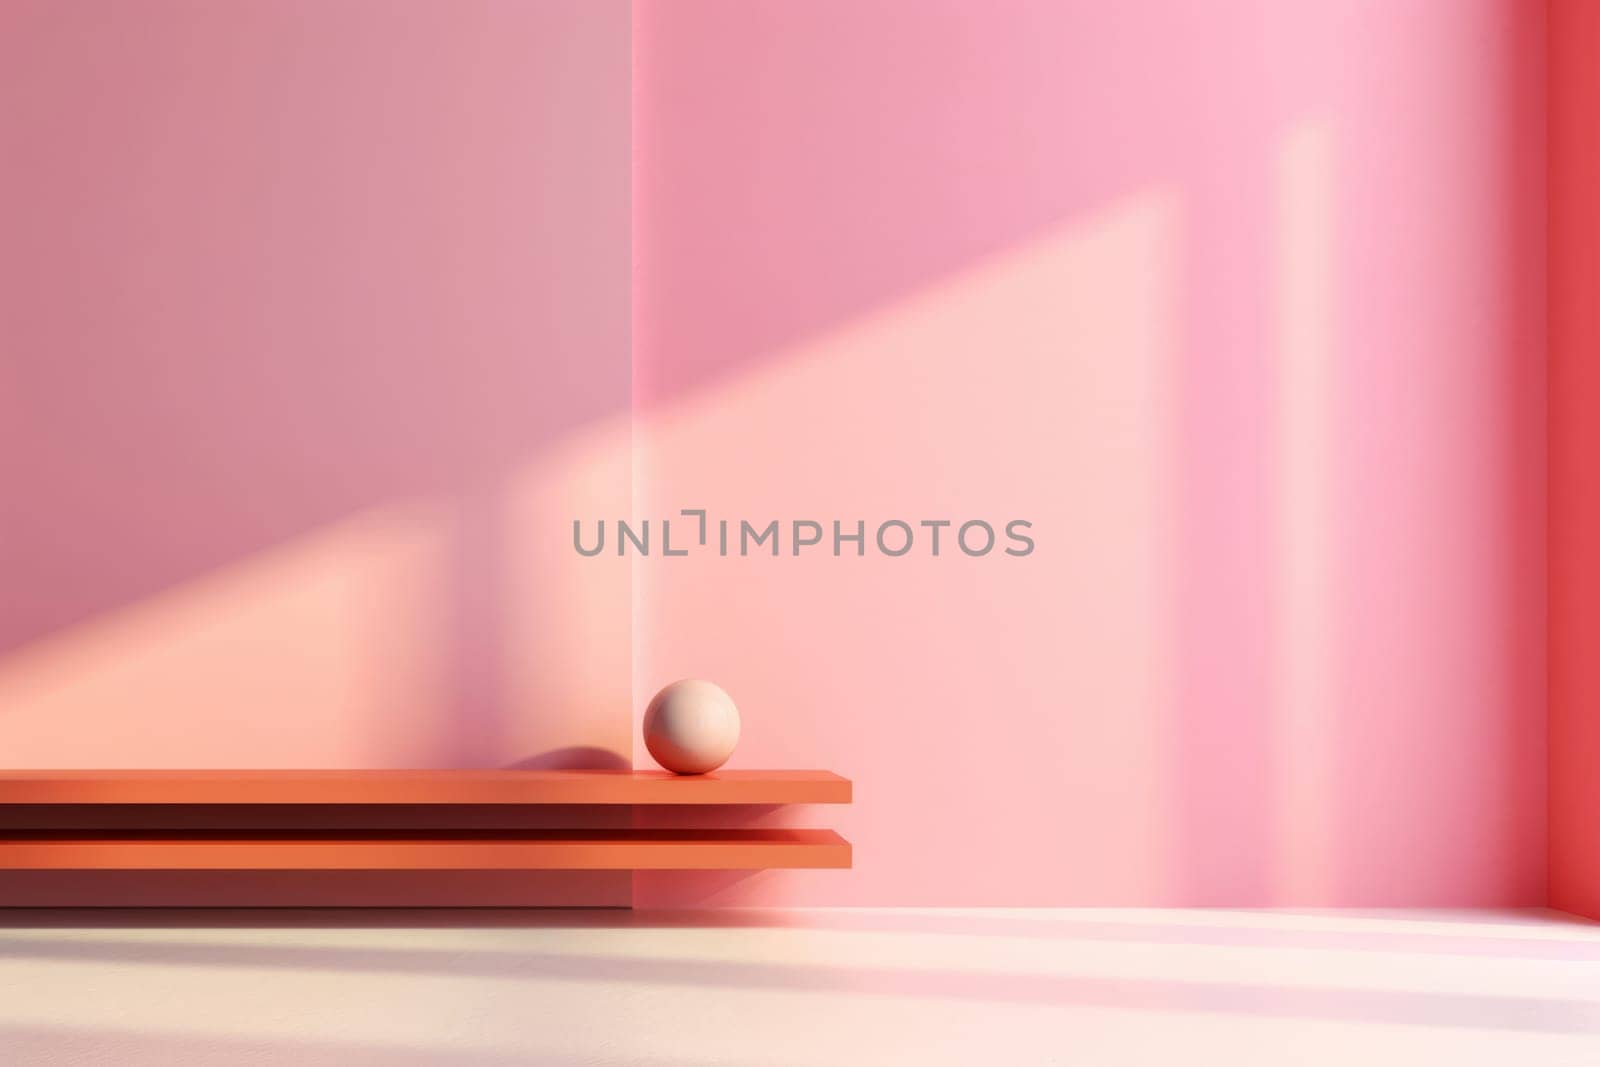 Soft pink hues and shadows with a solitary sphere on layered platforms